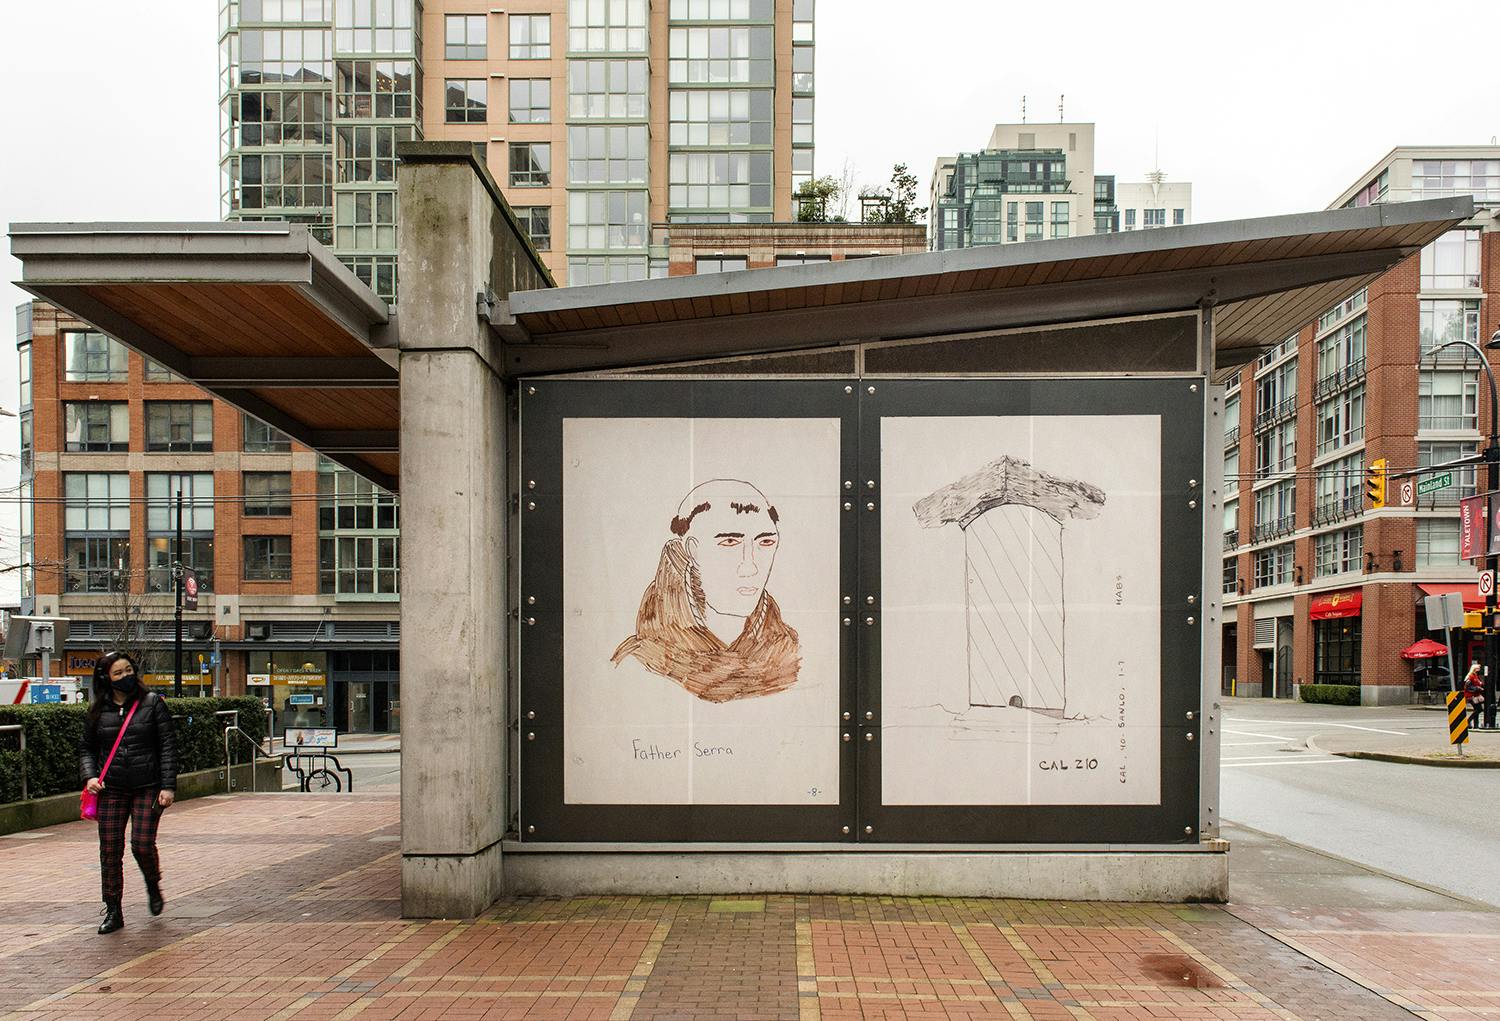 An exterior view of a train station displaying Sandoval’s work printed in vinyl. The work depicts an illustration of a Fransiscan friar on the left and on the right an enlarged drawing of a doorway. 